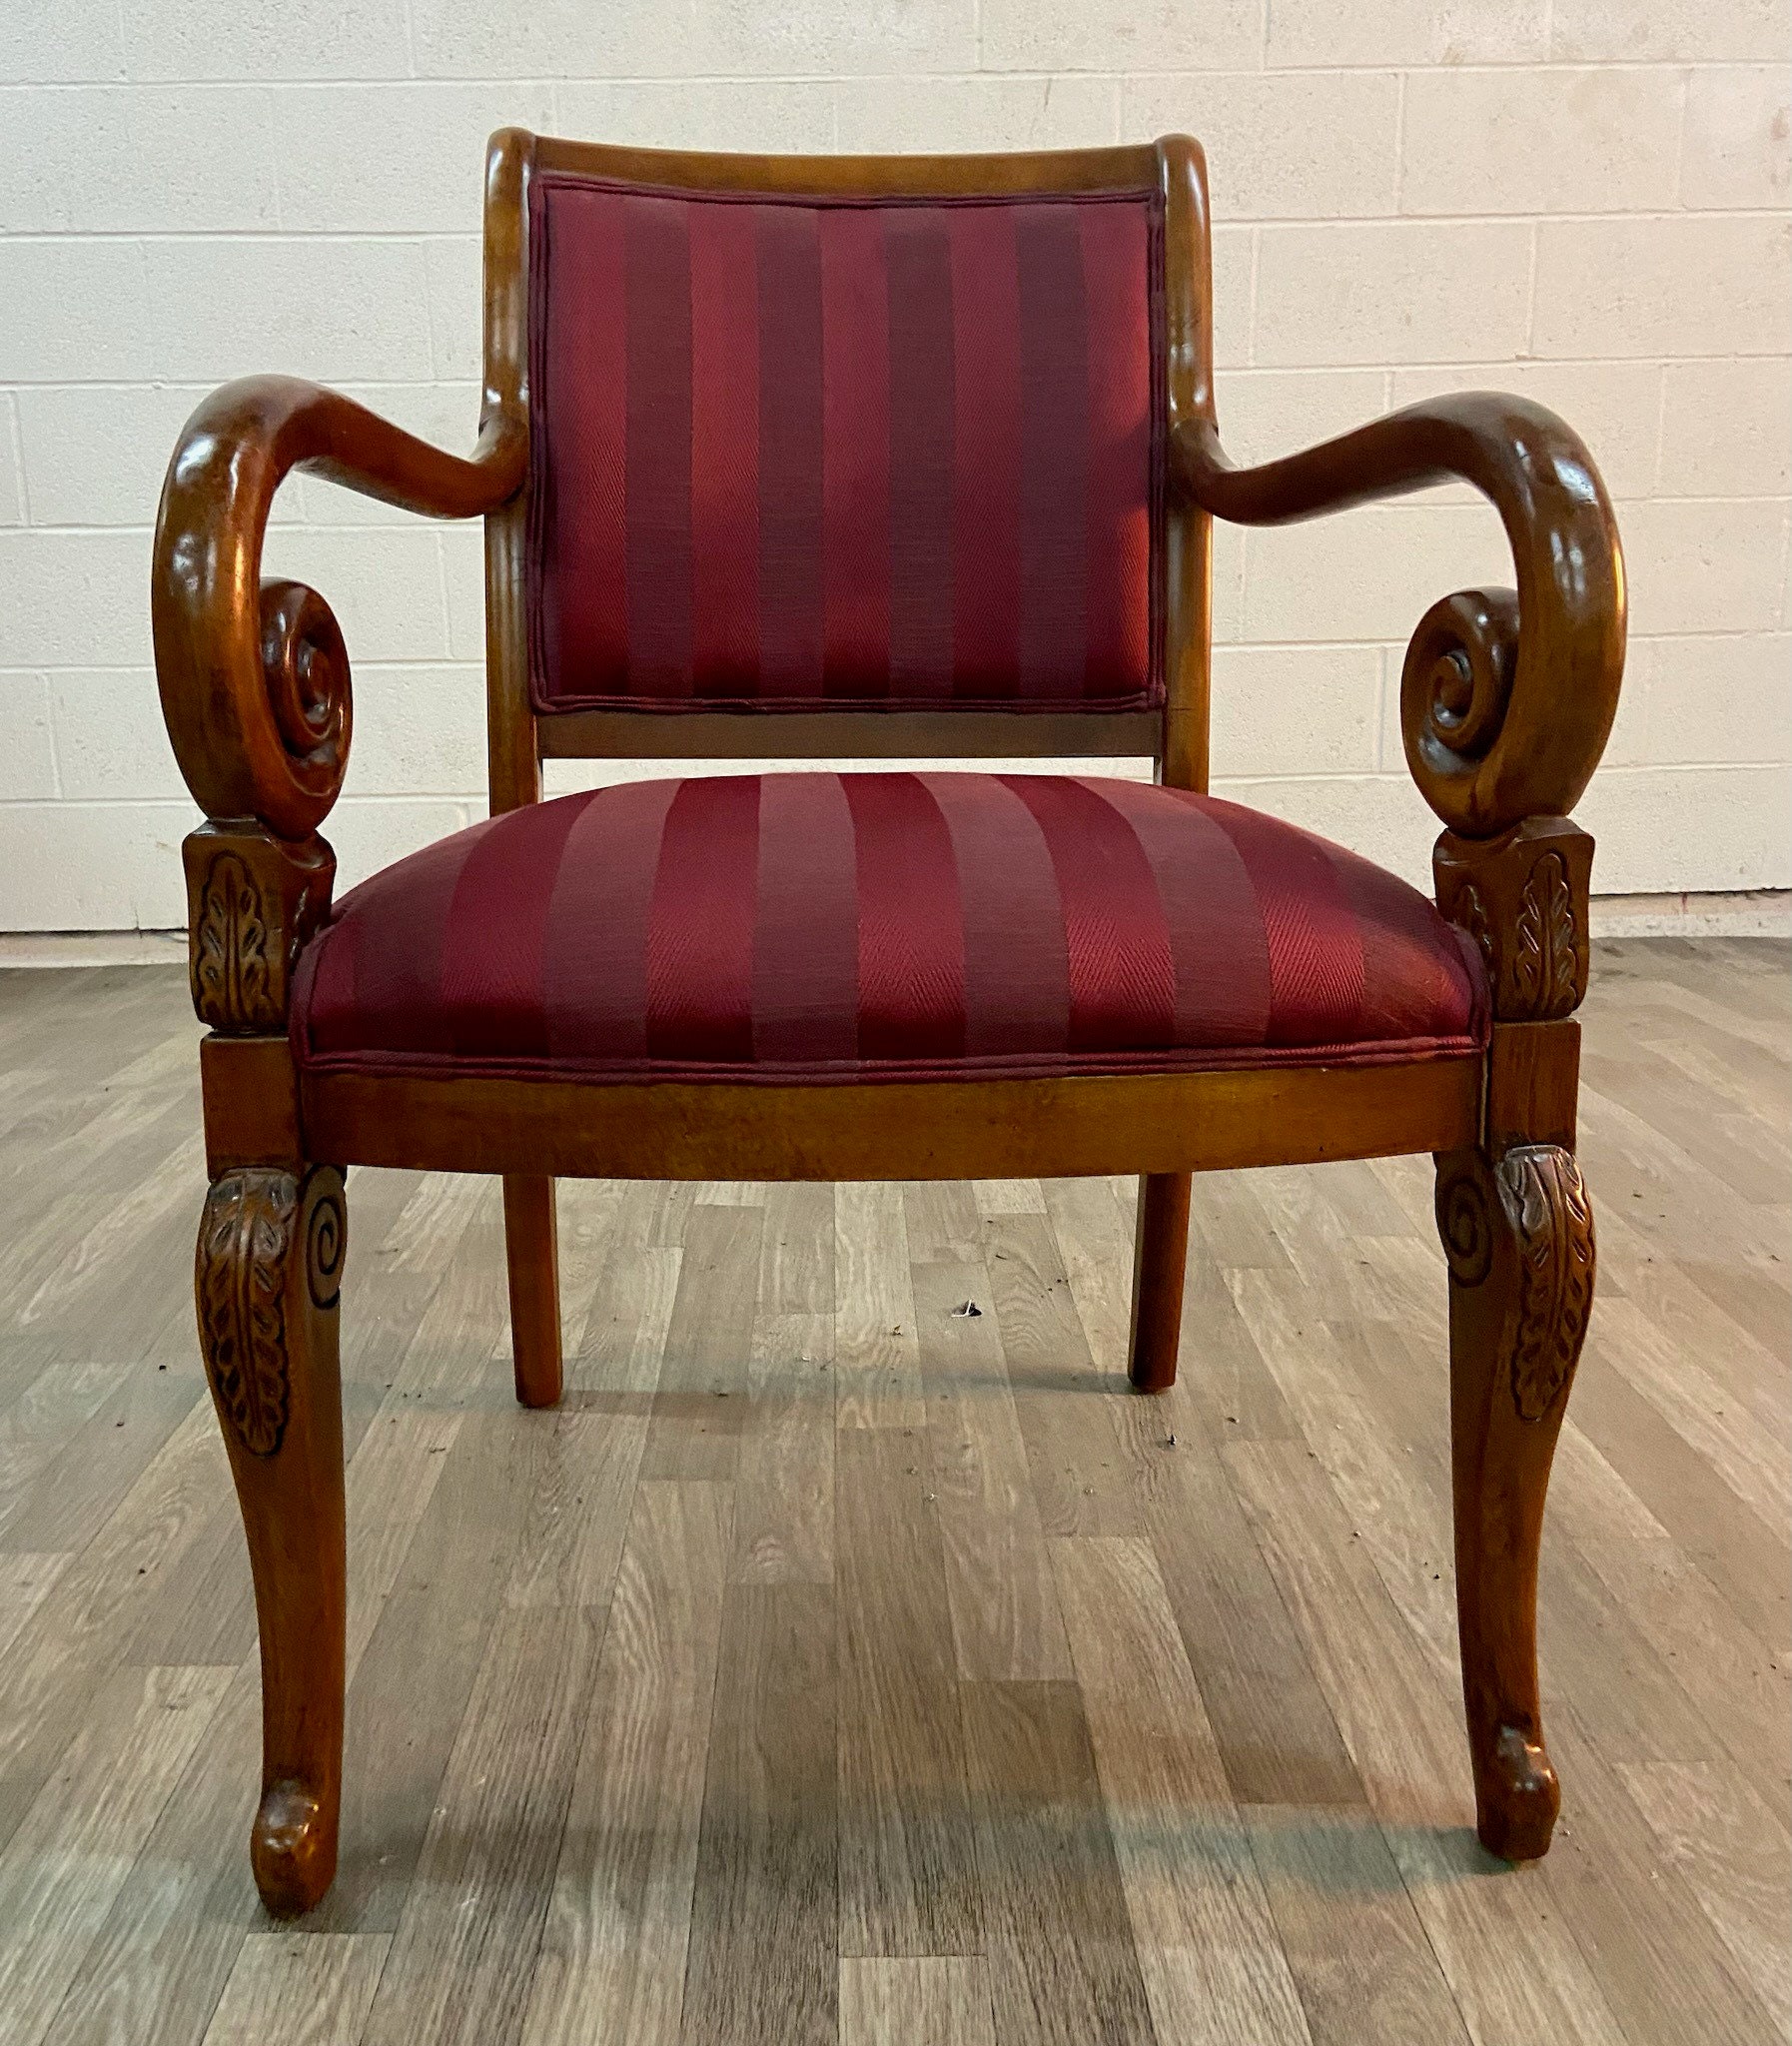 Upholstered King Louis Back Arm Chair Fairfield Chair Leg Color: Montego Bay, Upholstery Color: 3156 Linen